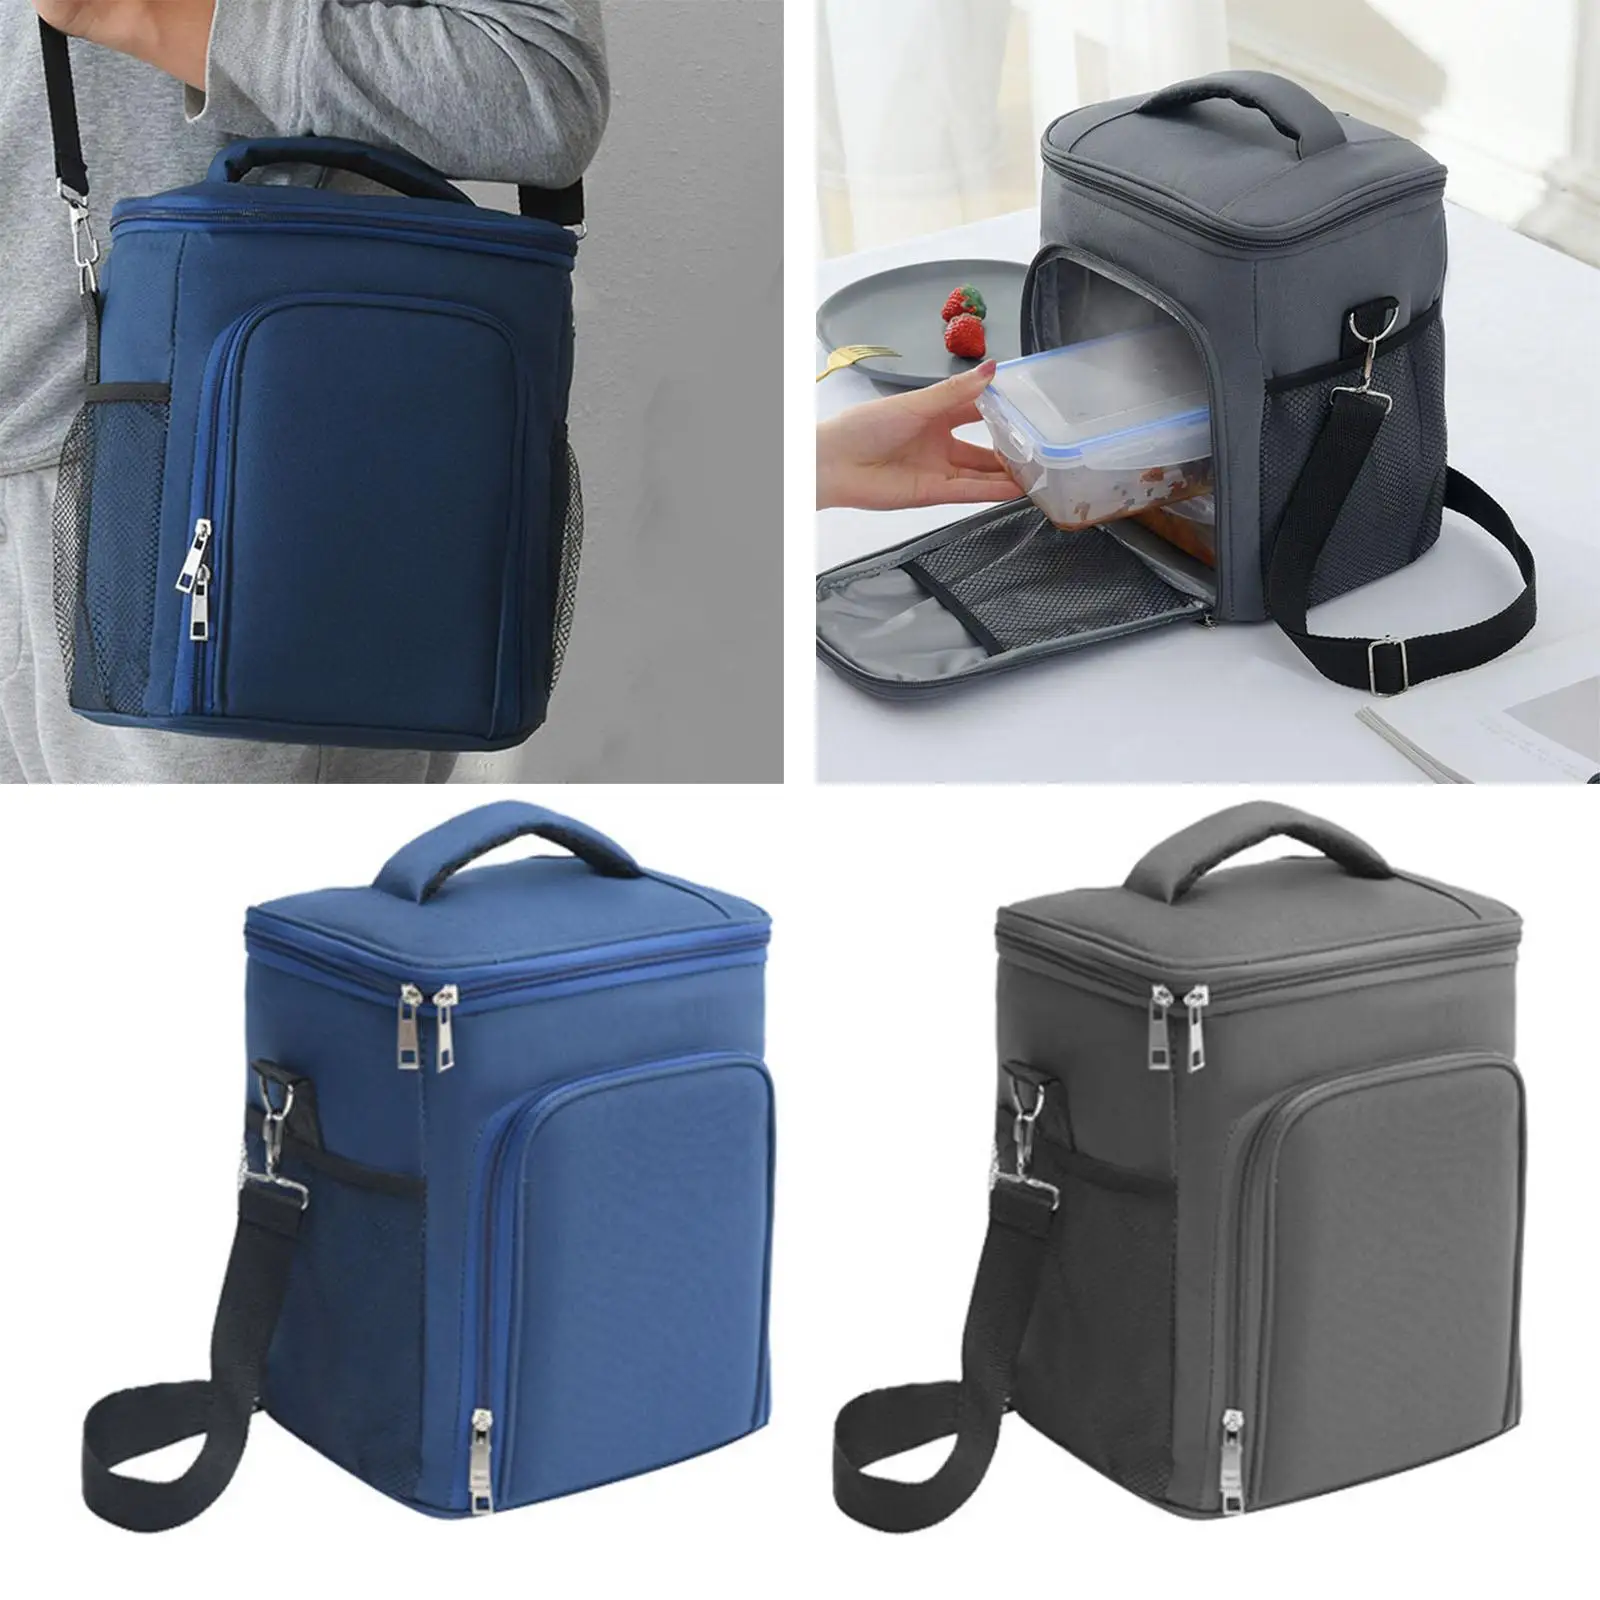 Large Capacity Cooler Backpack Food Container Reusable Lightweight with Pockets Lunch Bag for Office Outdoor Camping Teens Adult